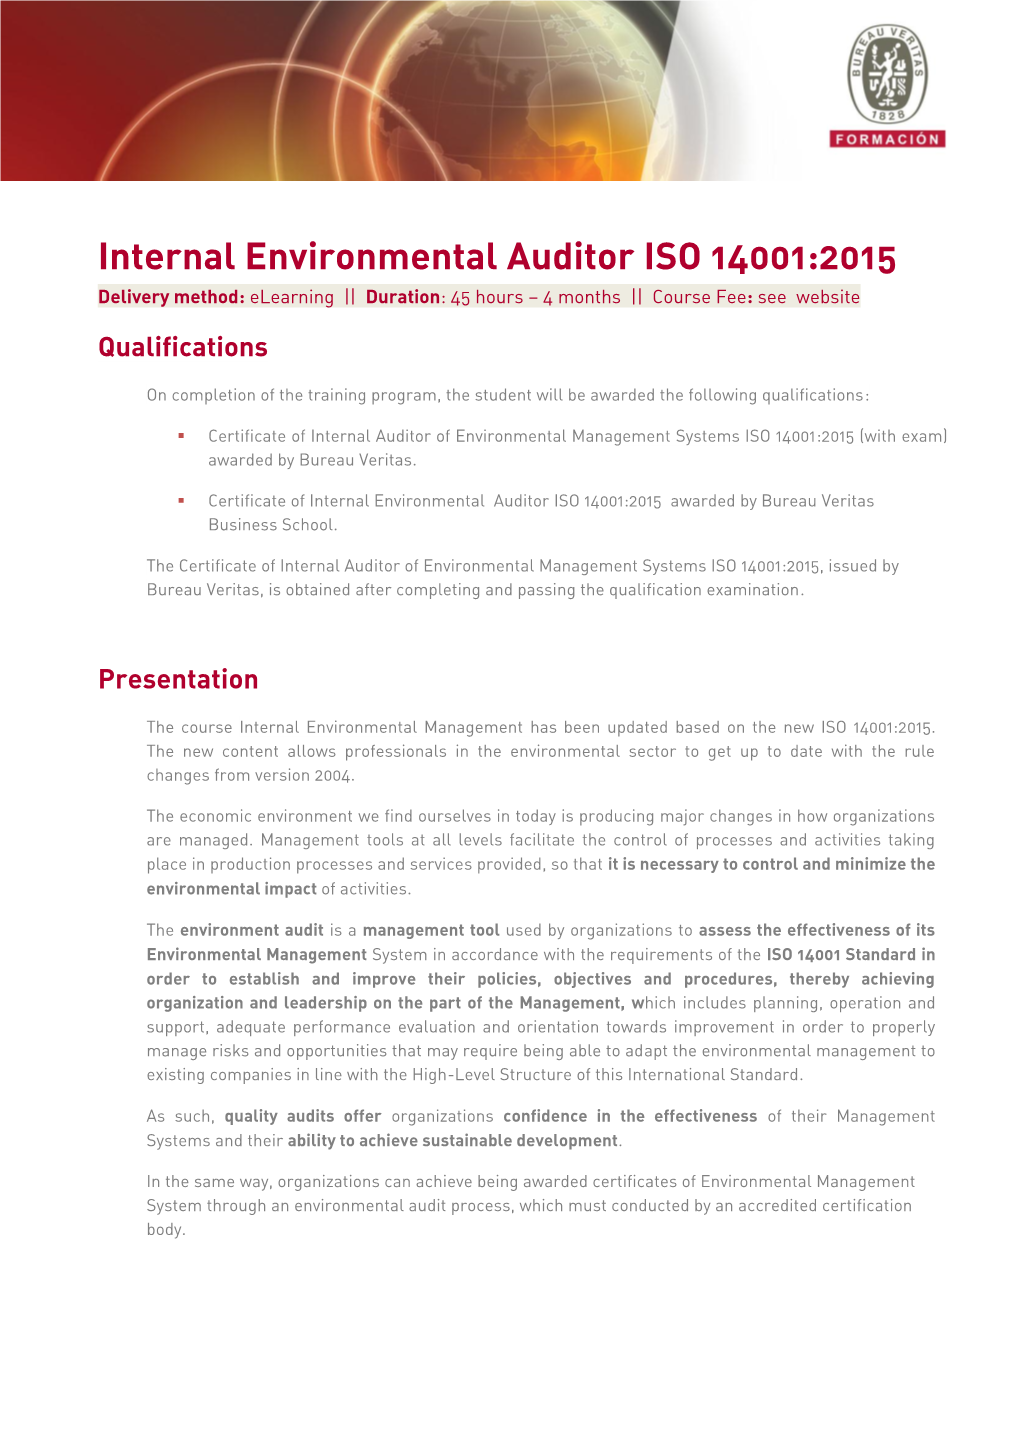 Internal Environmental Auditor ISO 14001:2015 Delivery Method: Elearning || Duration: 45 Hours – 4 Months || Course Fee: See Website Qualifications